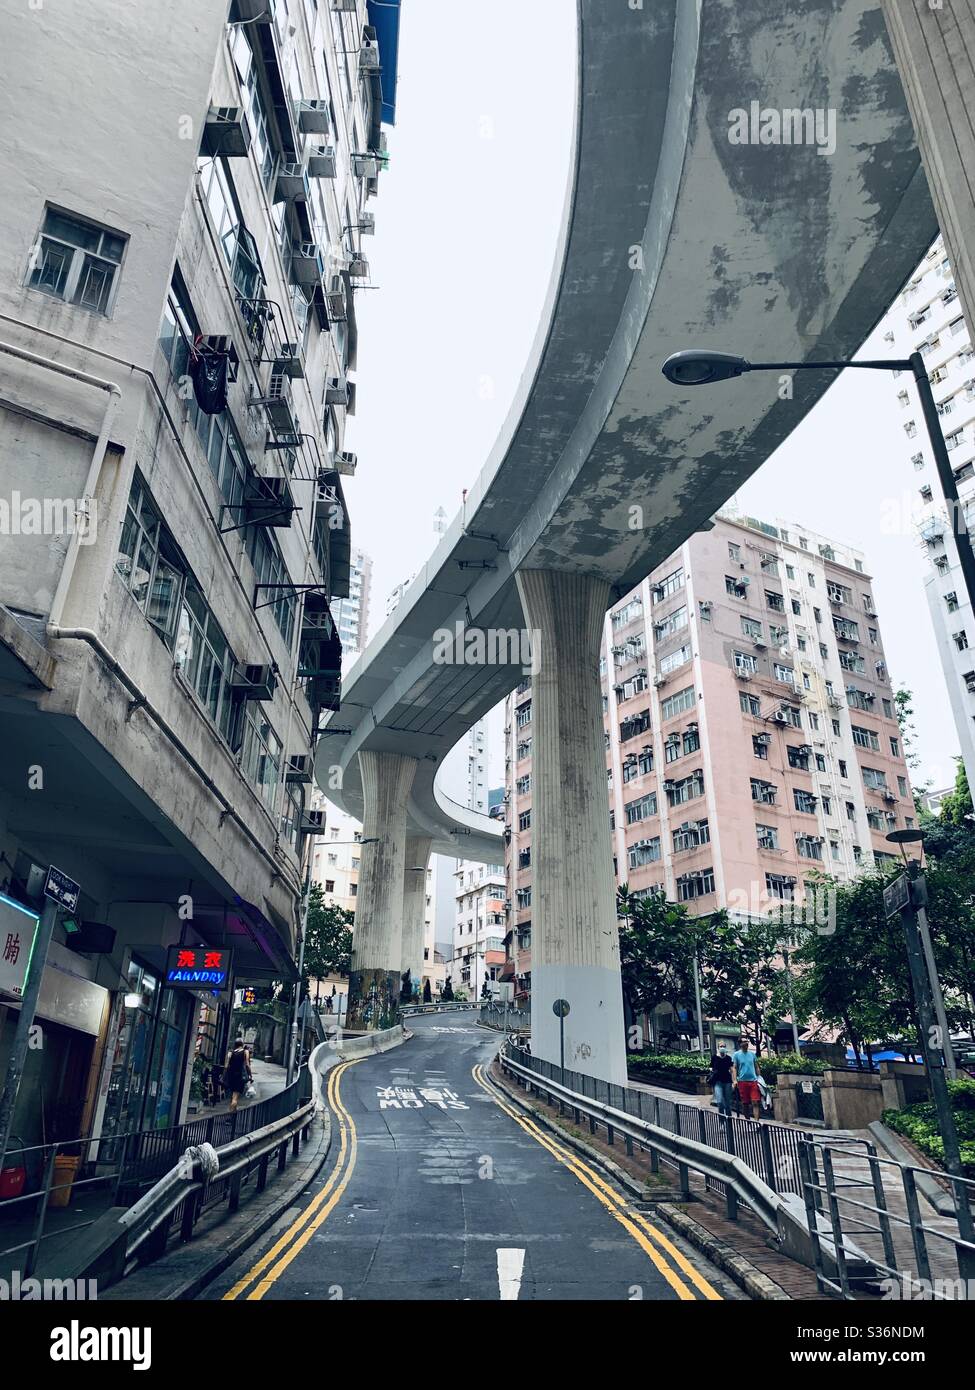 Under a giant flyover  surrounded by residential buildings. Stock Photo